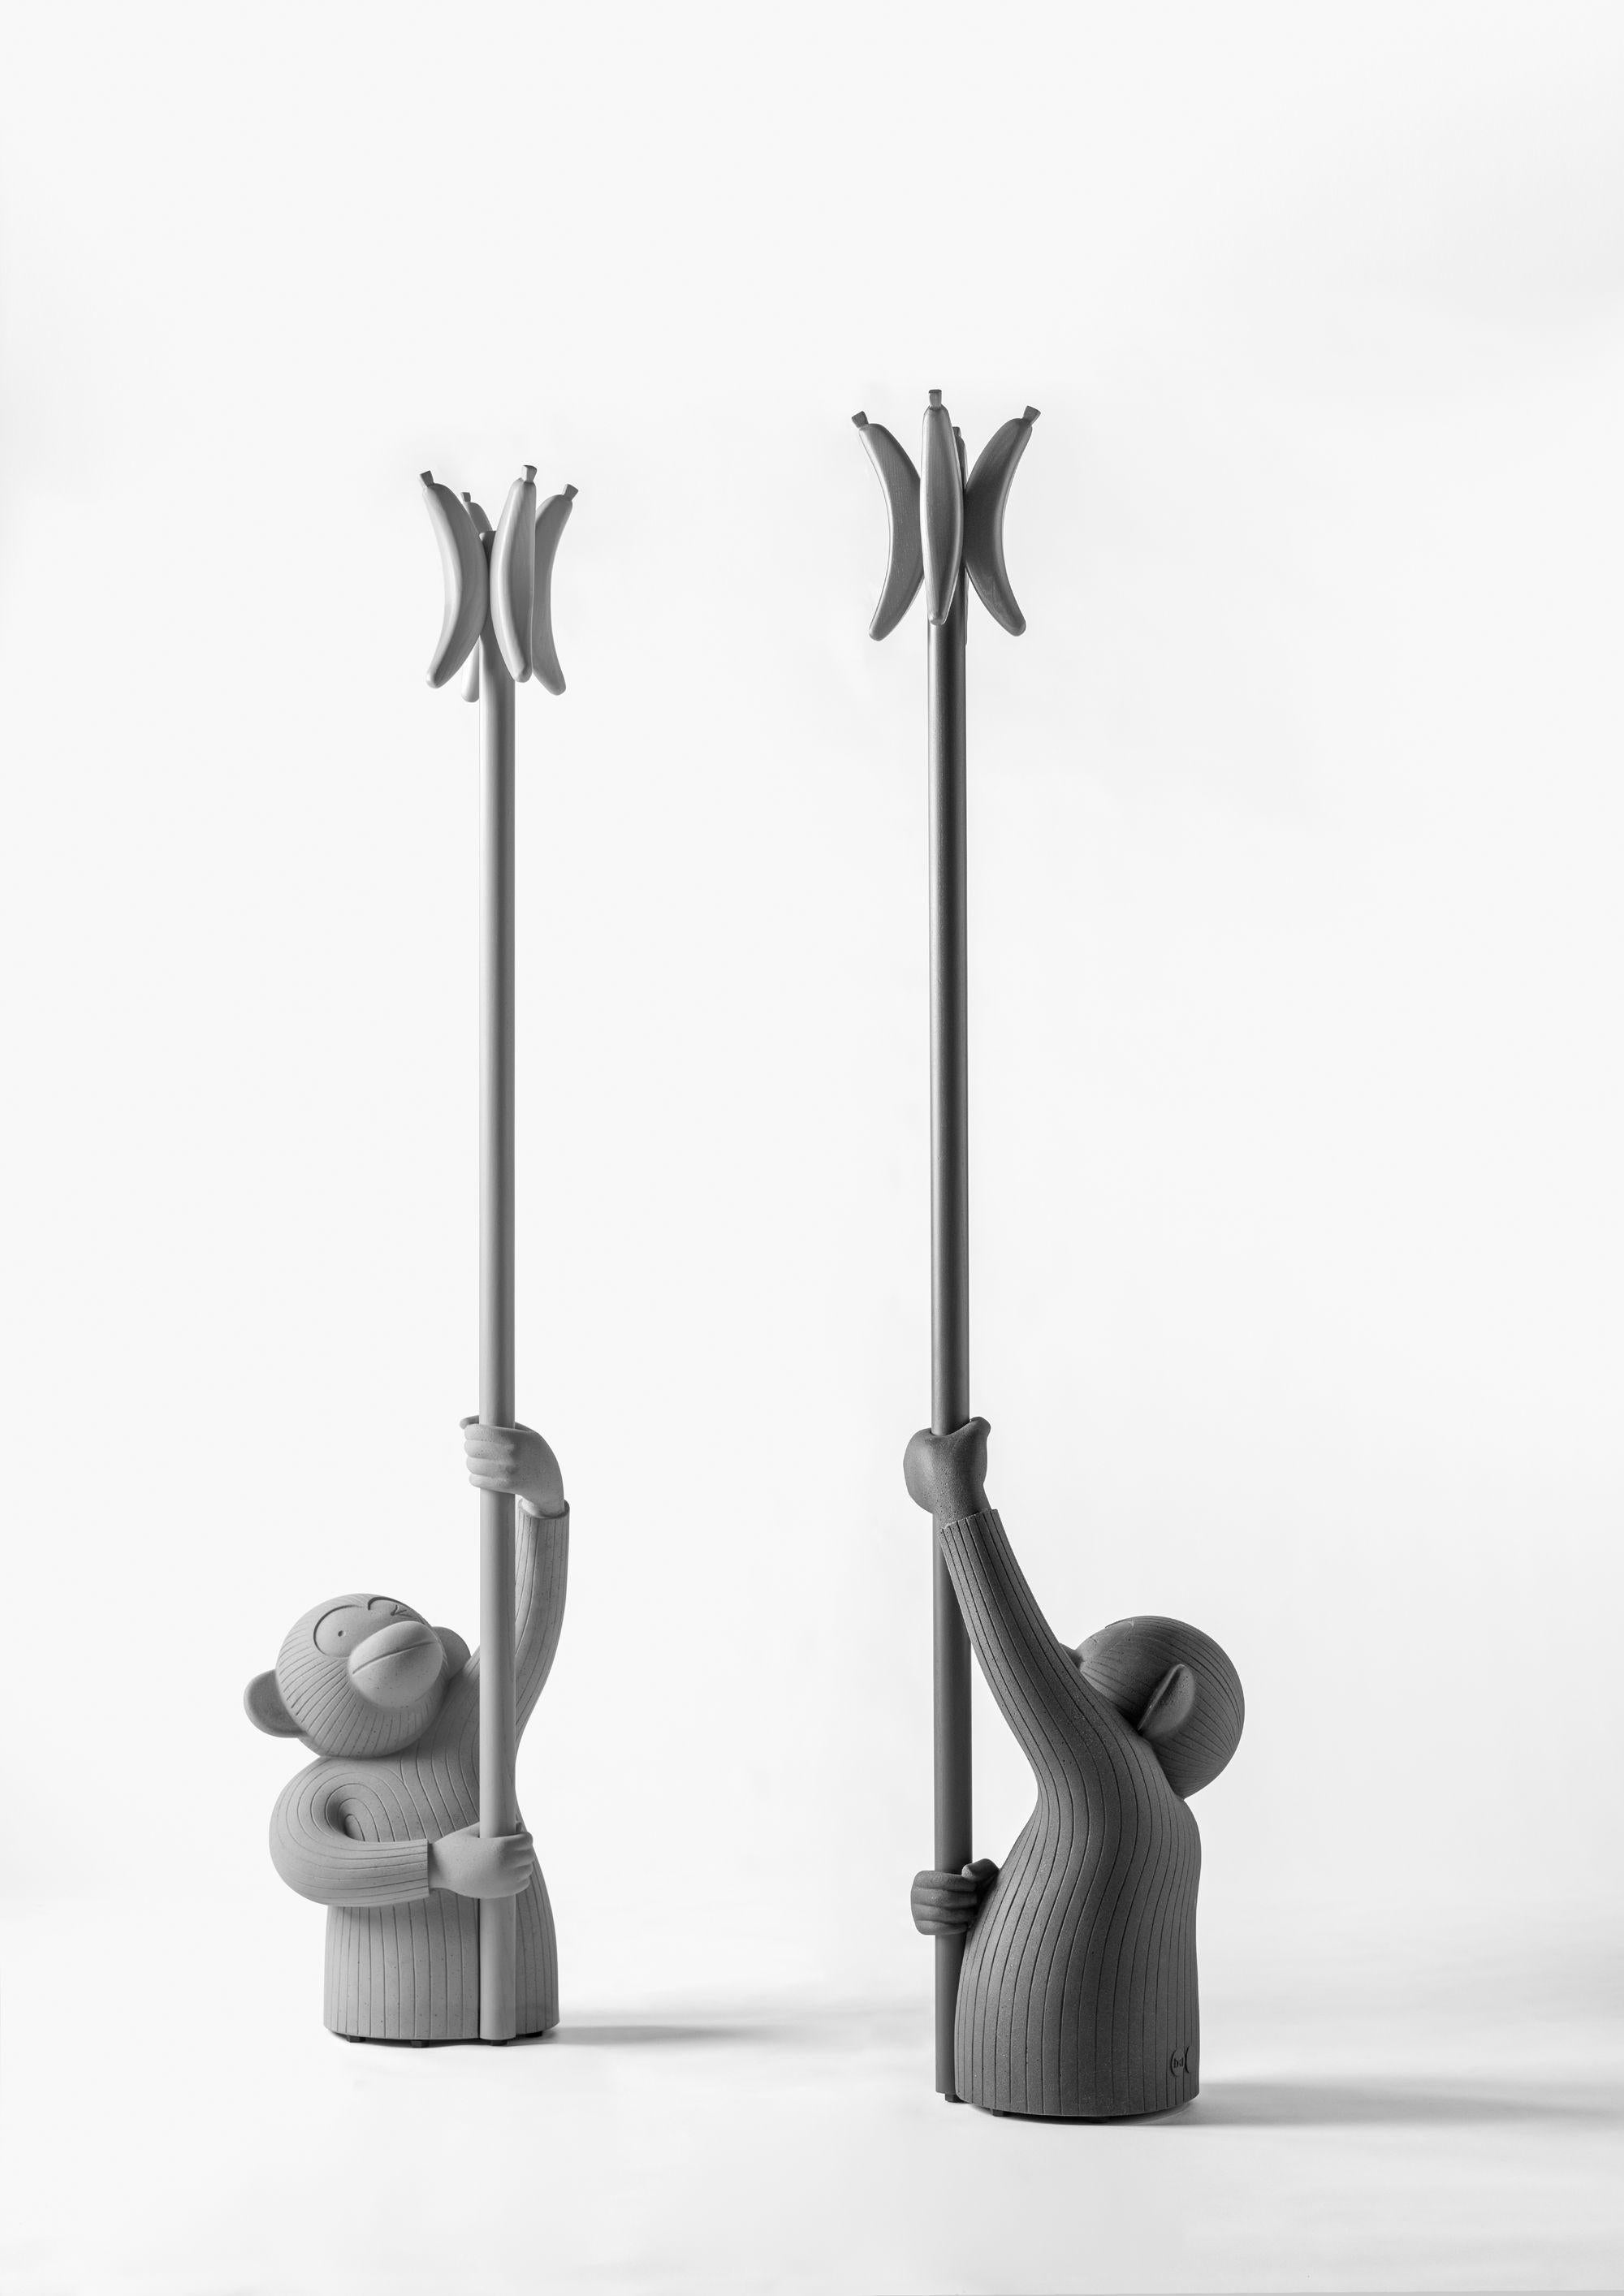 Set of 2 monkey coat stands black and grey by Jaime Hayon
Dimensions: D 31 x W 39 x H 167 cm 
Materials: Concrete

«We all want what can fall from above to be something good. For me, there’s nothing better than getting home to this smiling